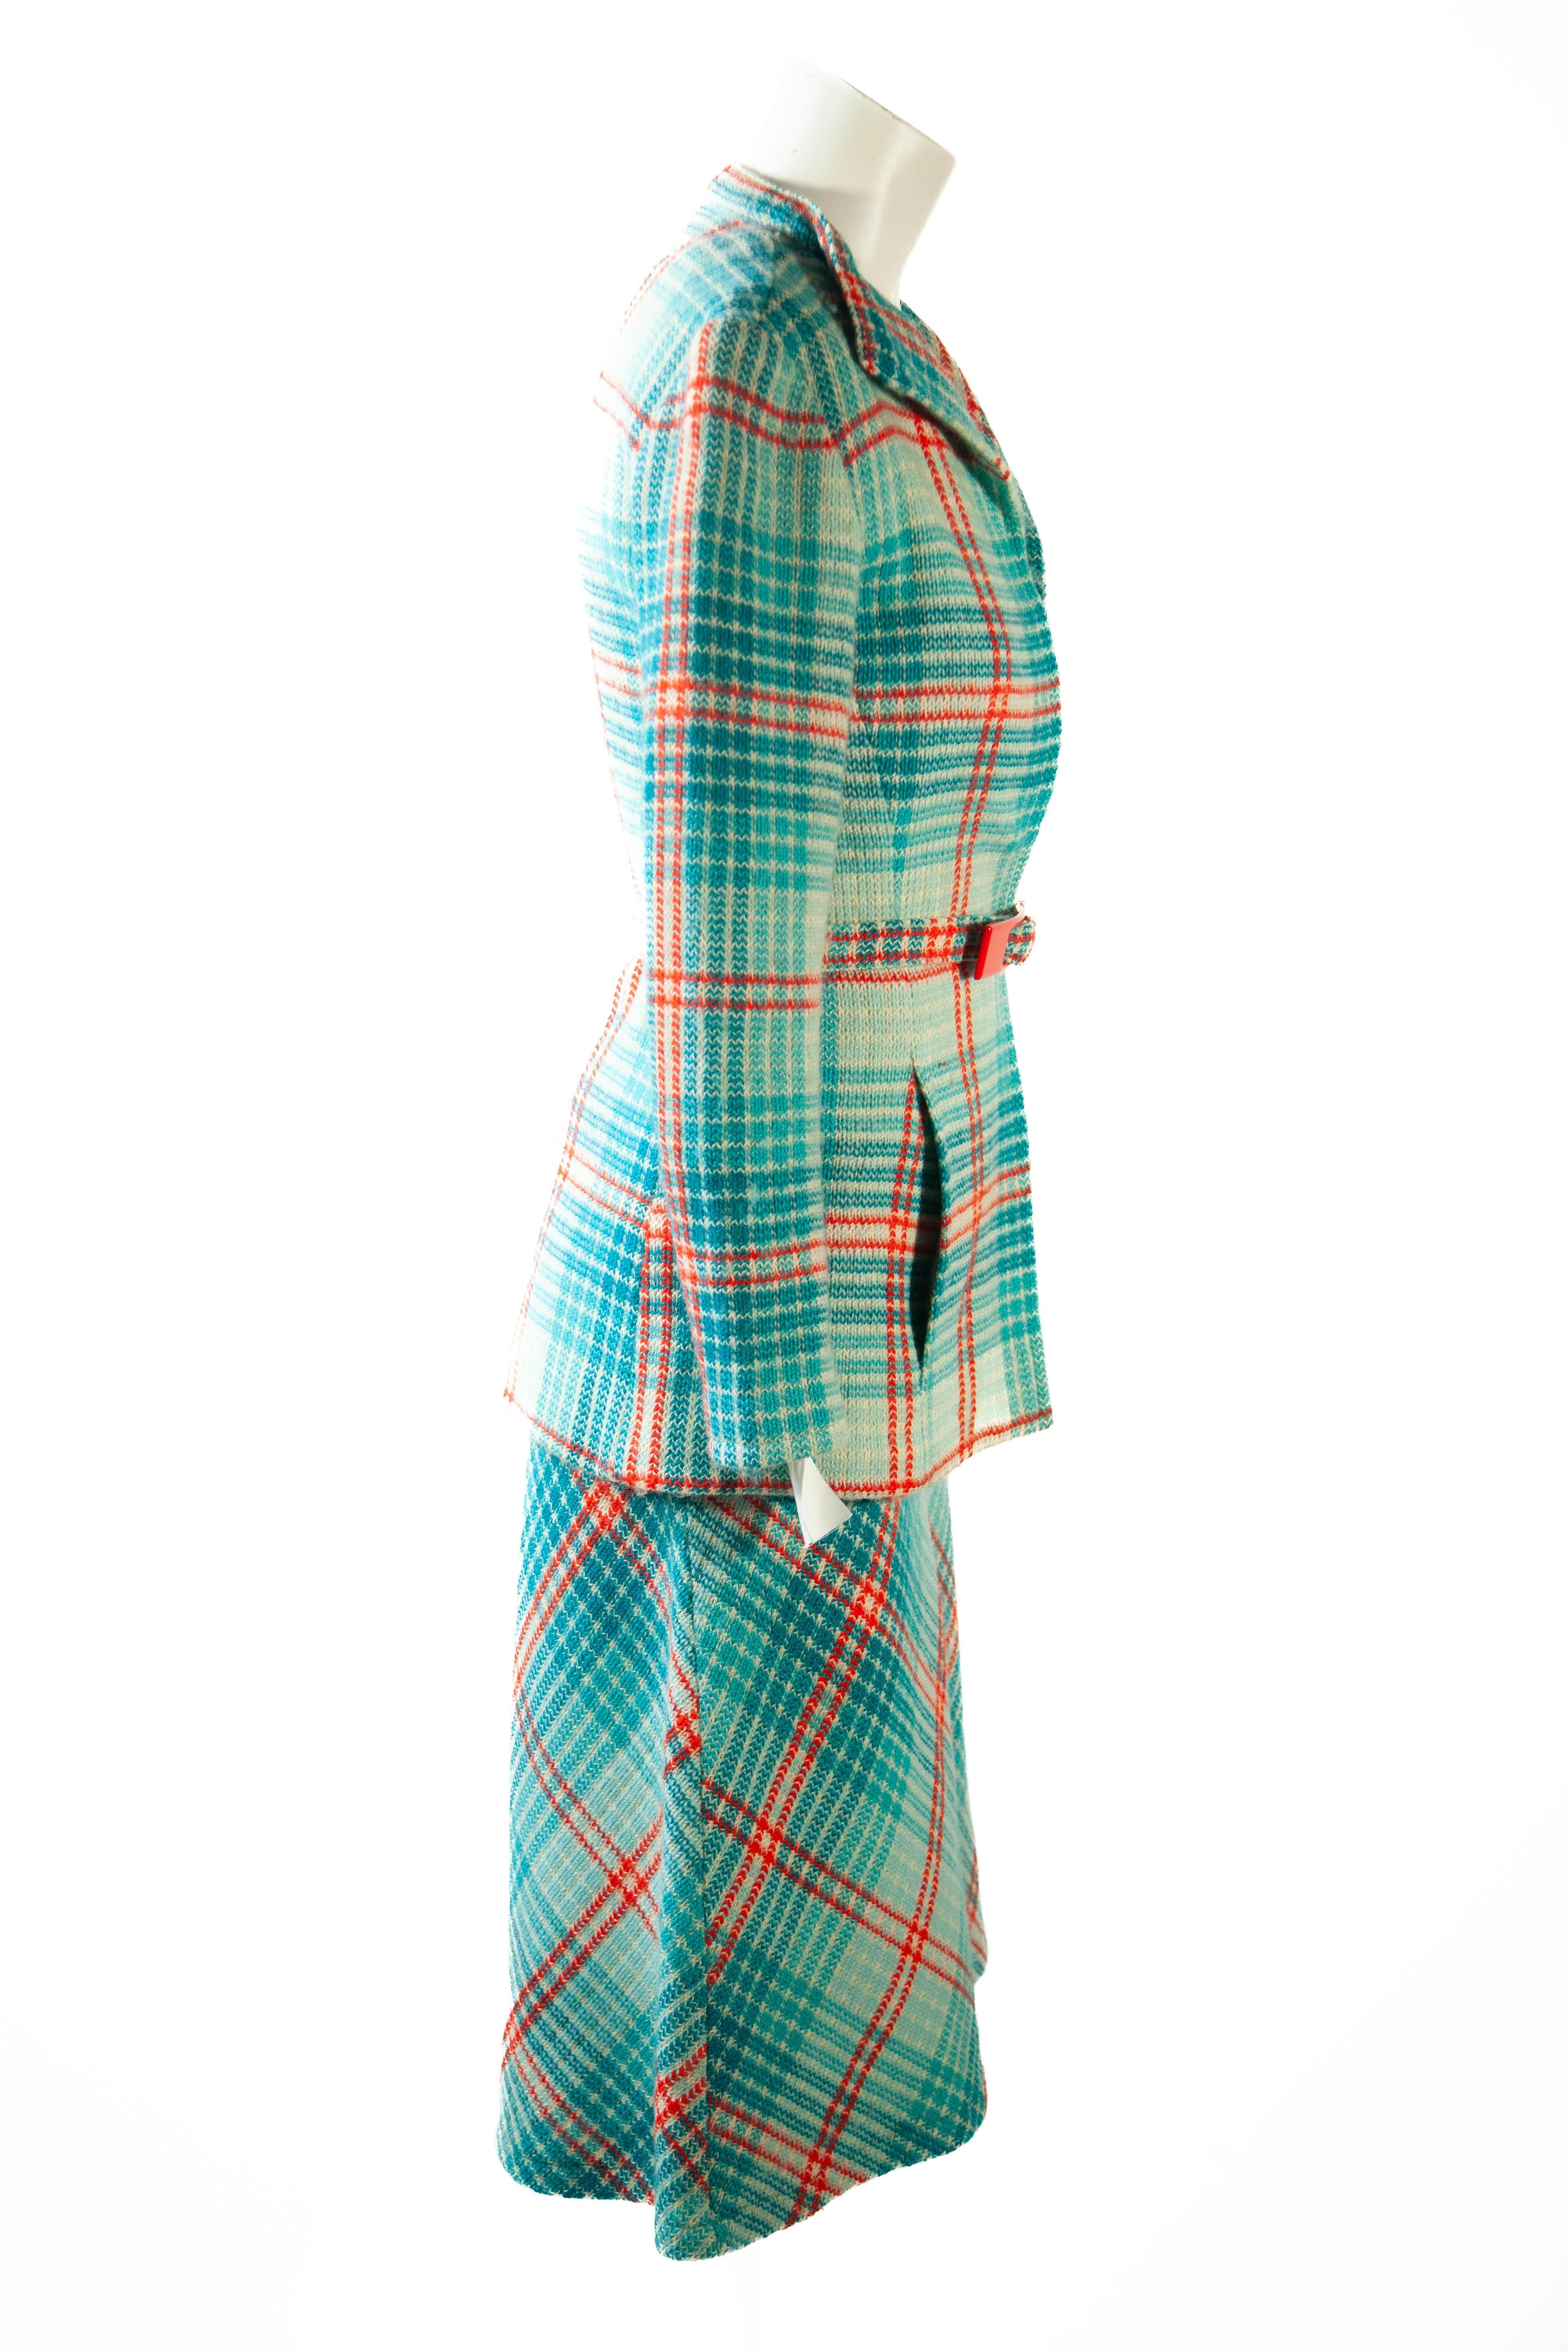 MISSONI, Museum three (3) piece ensemble, 1957 with Museum tags

Plaid blue and red, knit skirt, vest and matching jacket with coordinating belt red buckle belt with Museum tags on individual pieces.

This ensemble was Inspired by Ballerina,